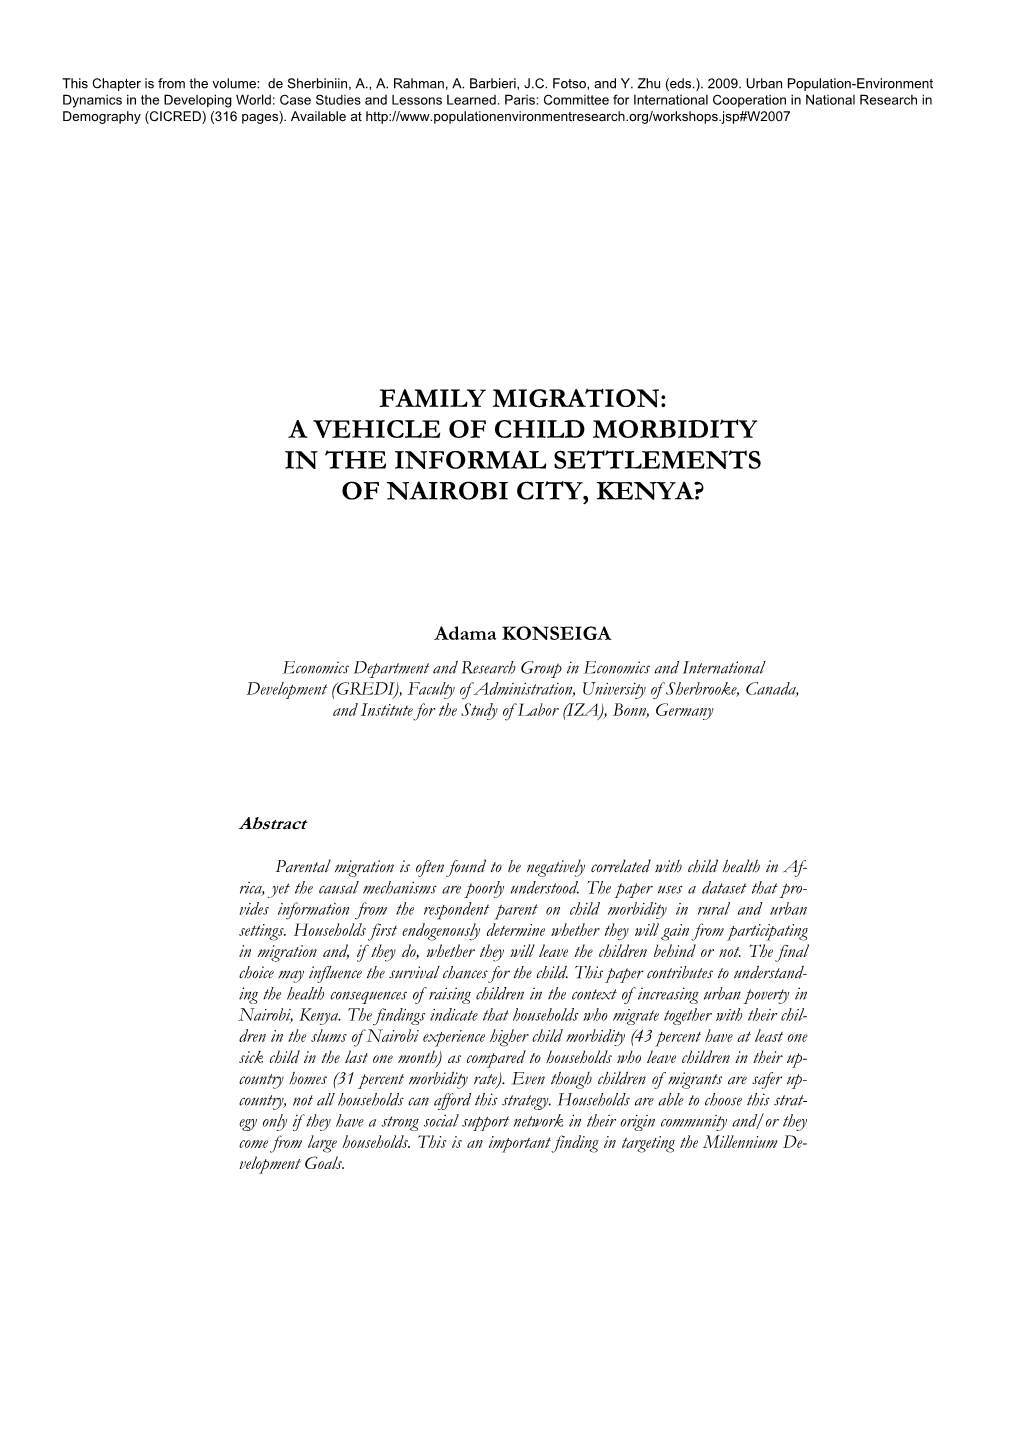 Family Migration: a Vehicle of Child Morbidity in the Informal Settlements of Nairobi City, Kenya?